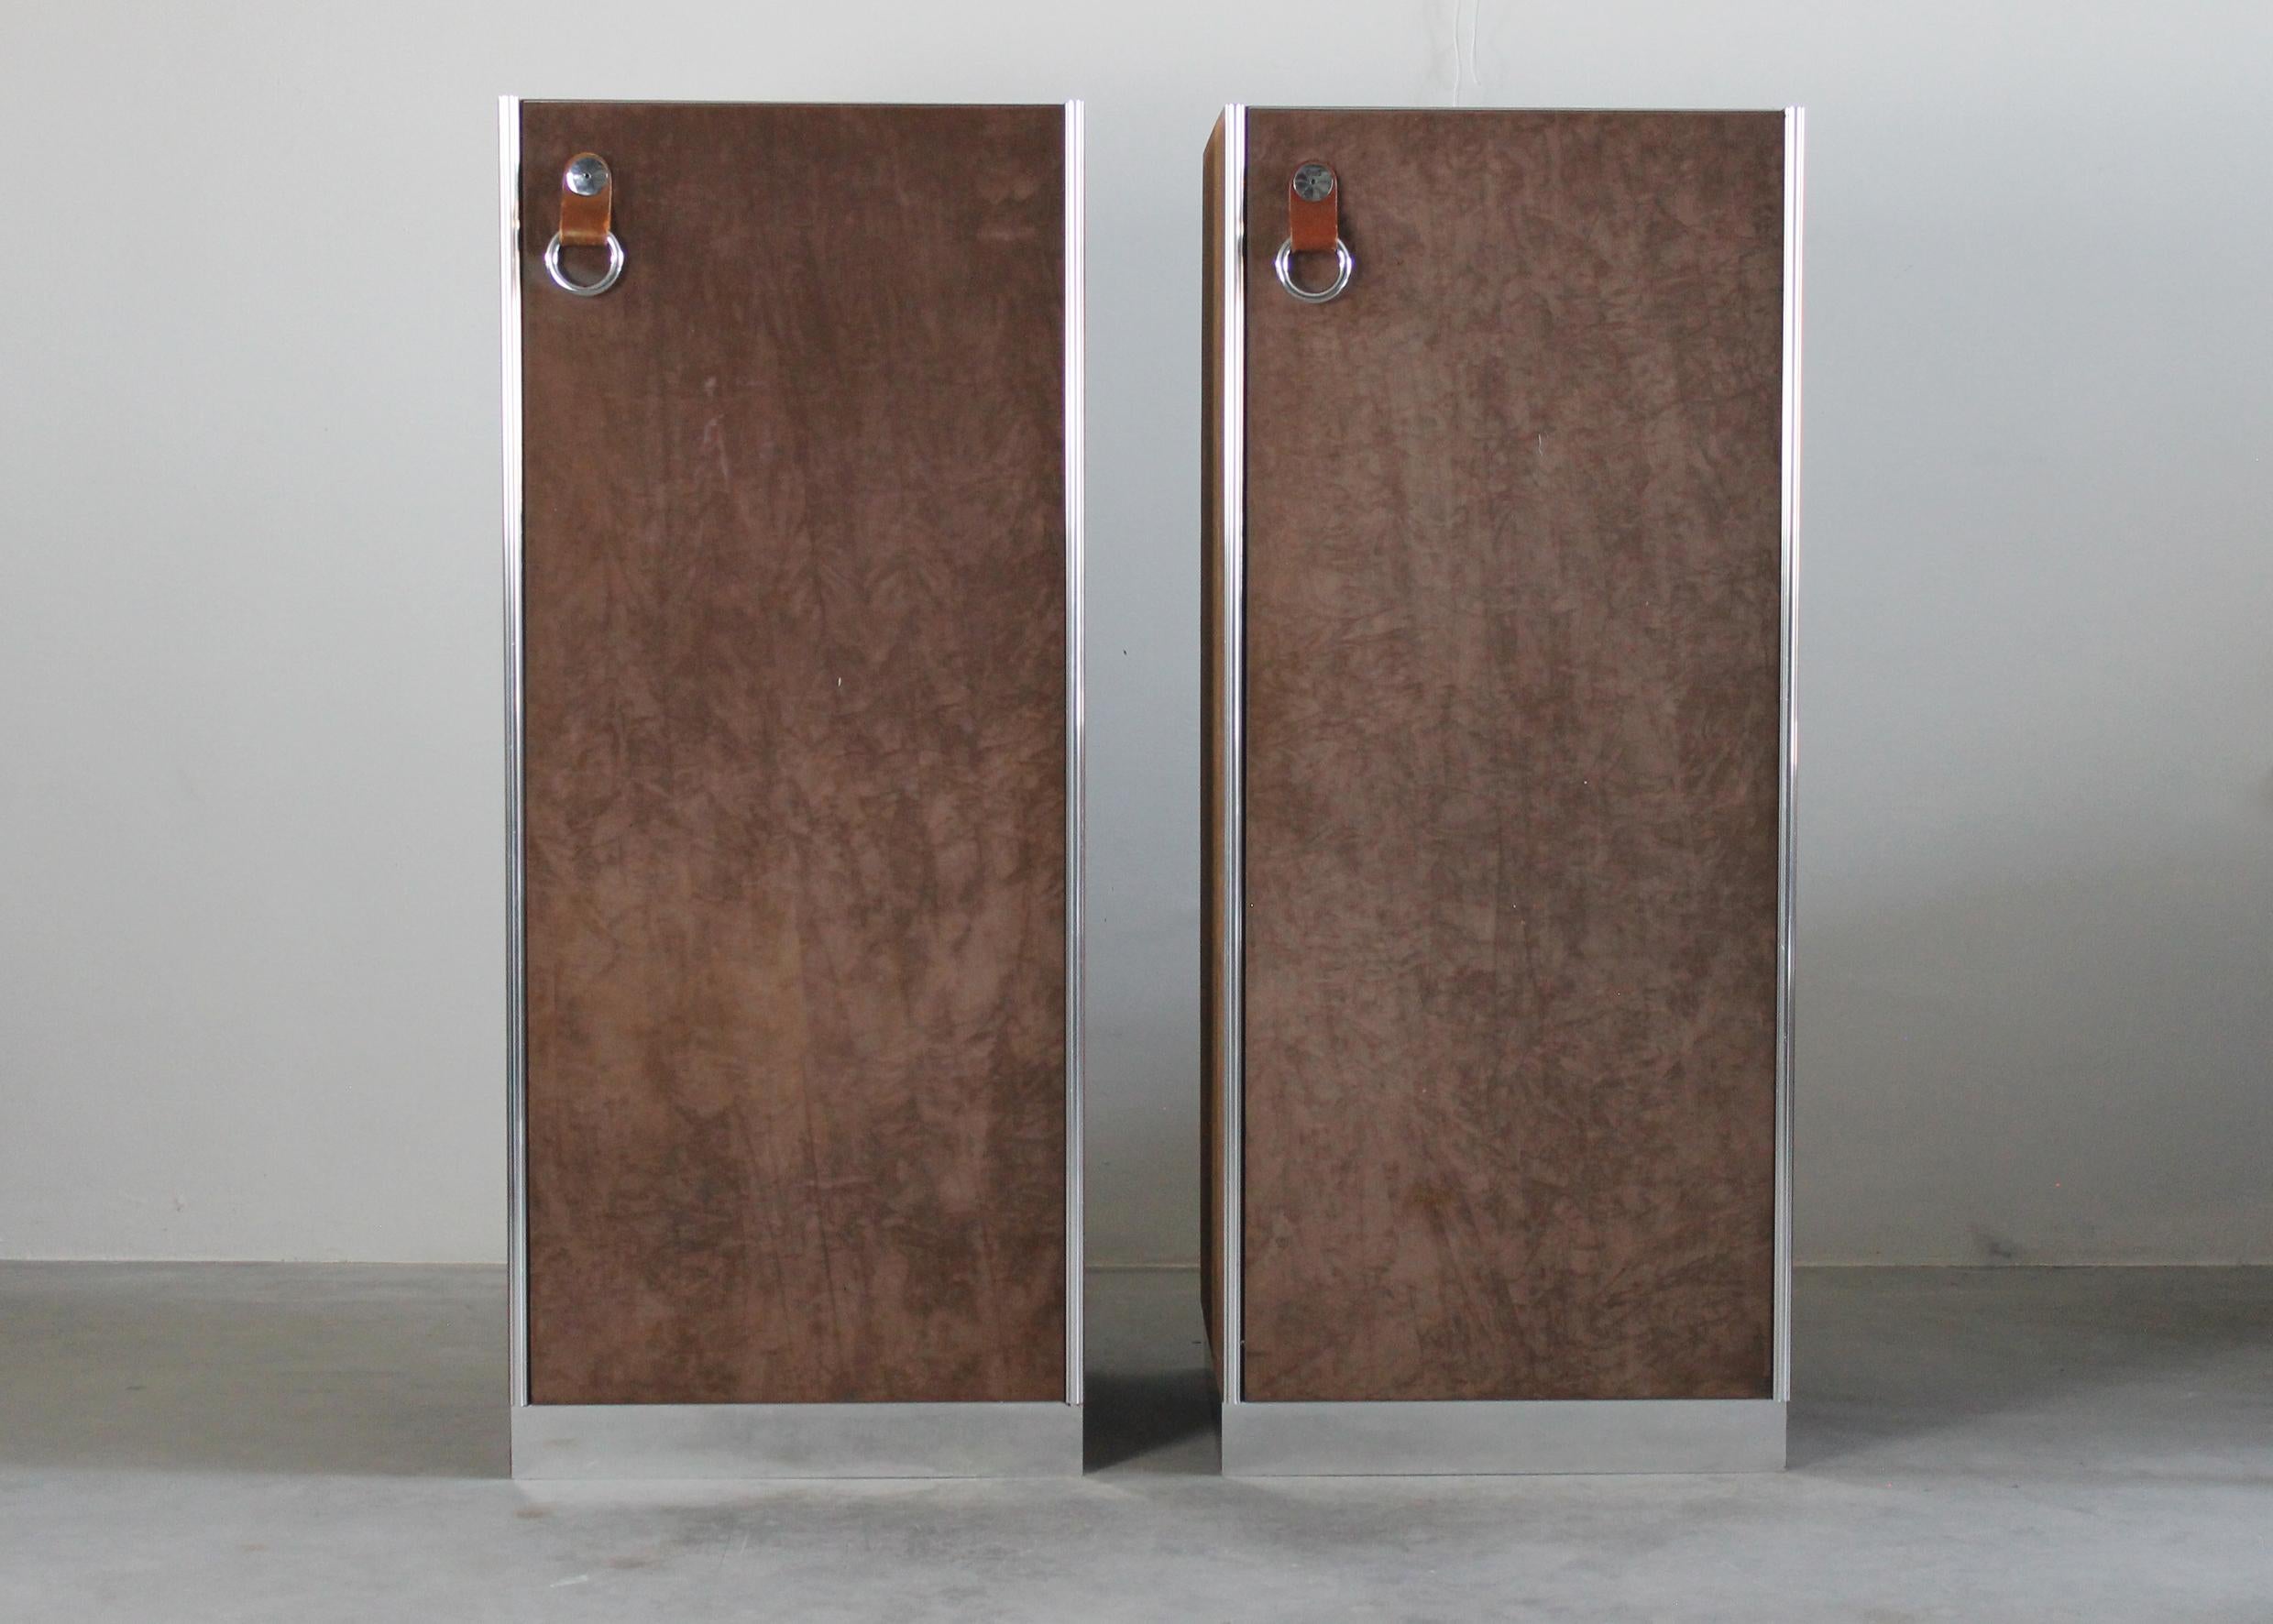 Set of two cabinets with suede clad panels, each panel is surrounded by a chromed steel frame and presents metal ring shape handles on the frontal part.

These cabinets was designed by Guido Faleschini as part of the Pace Collection for Italian